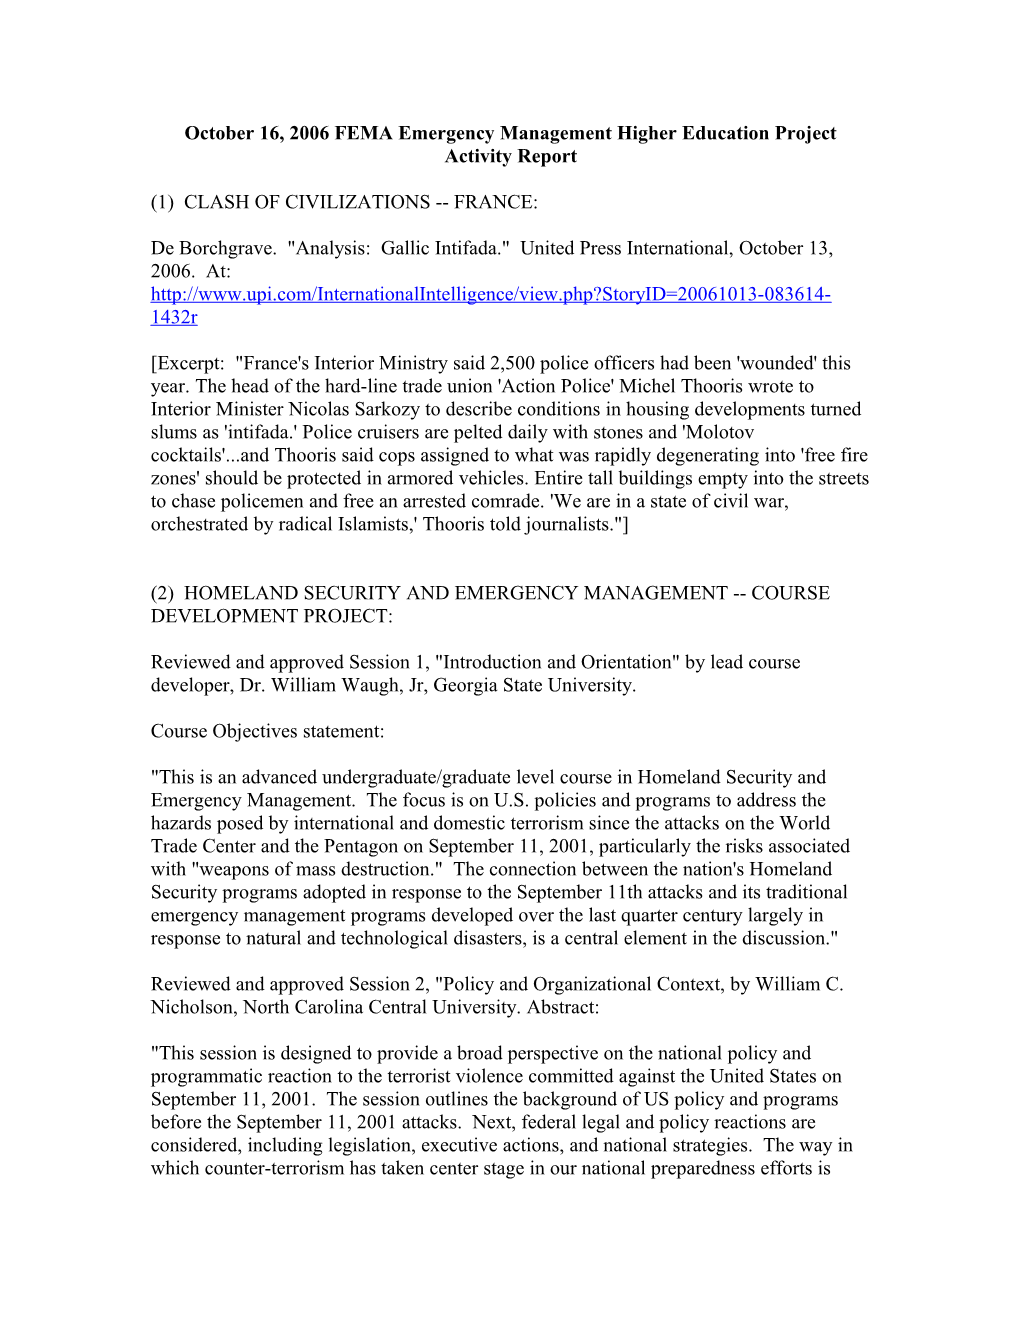 October 16, 2006 FEMA Emergency Management Higher Education Project Activity Report